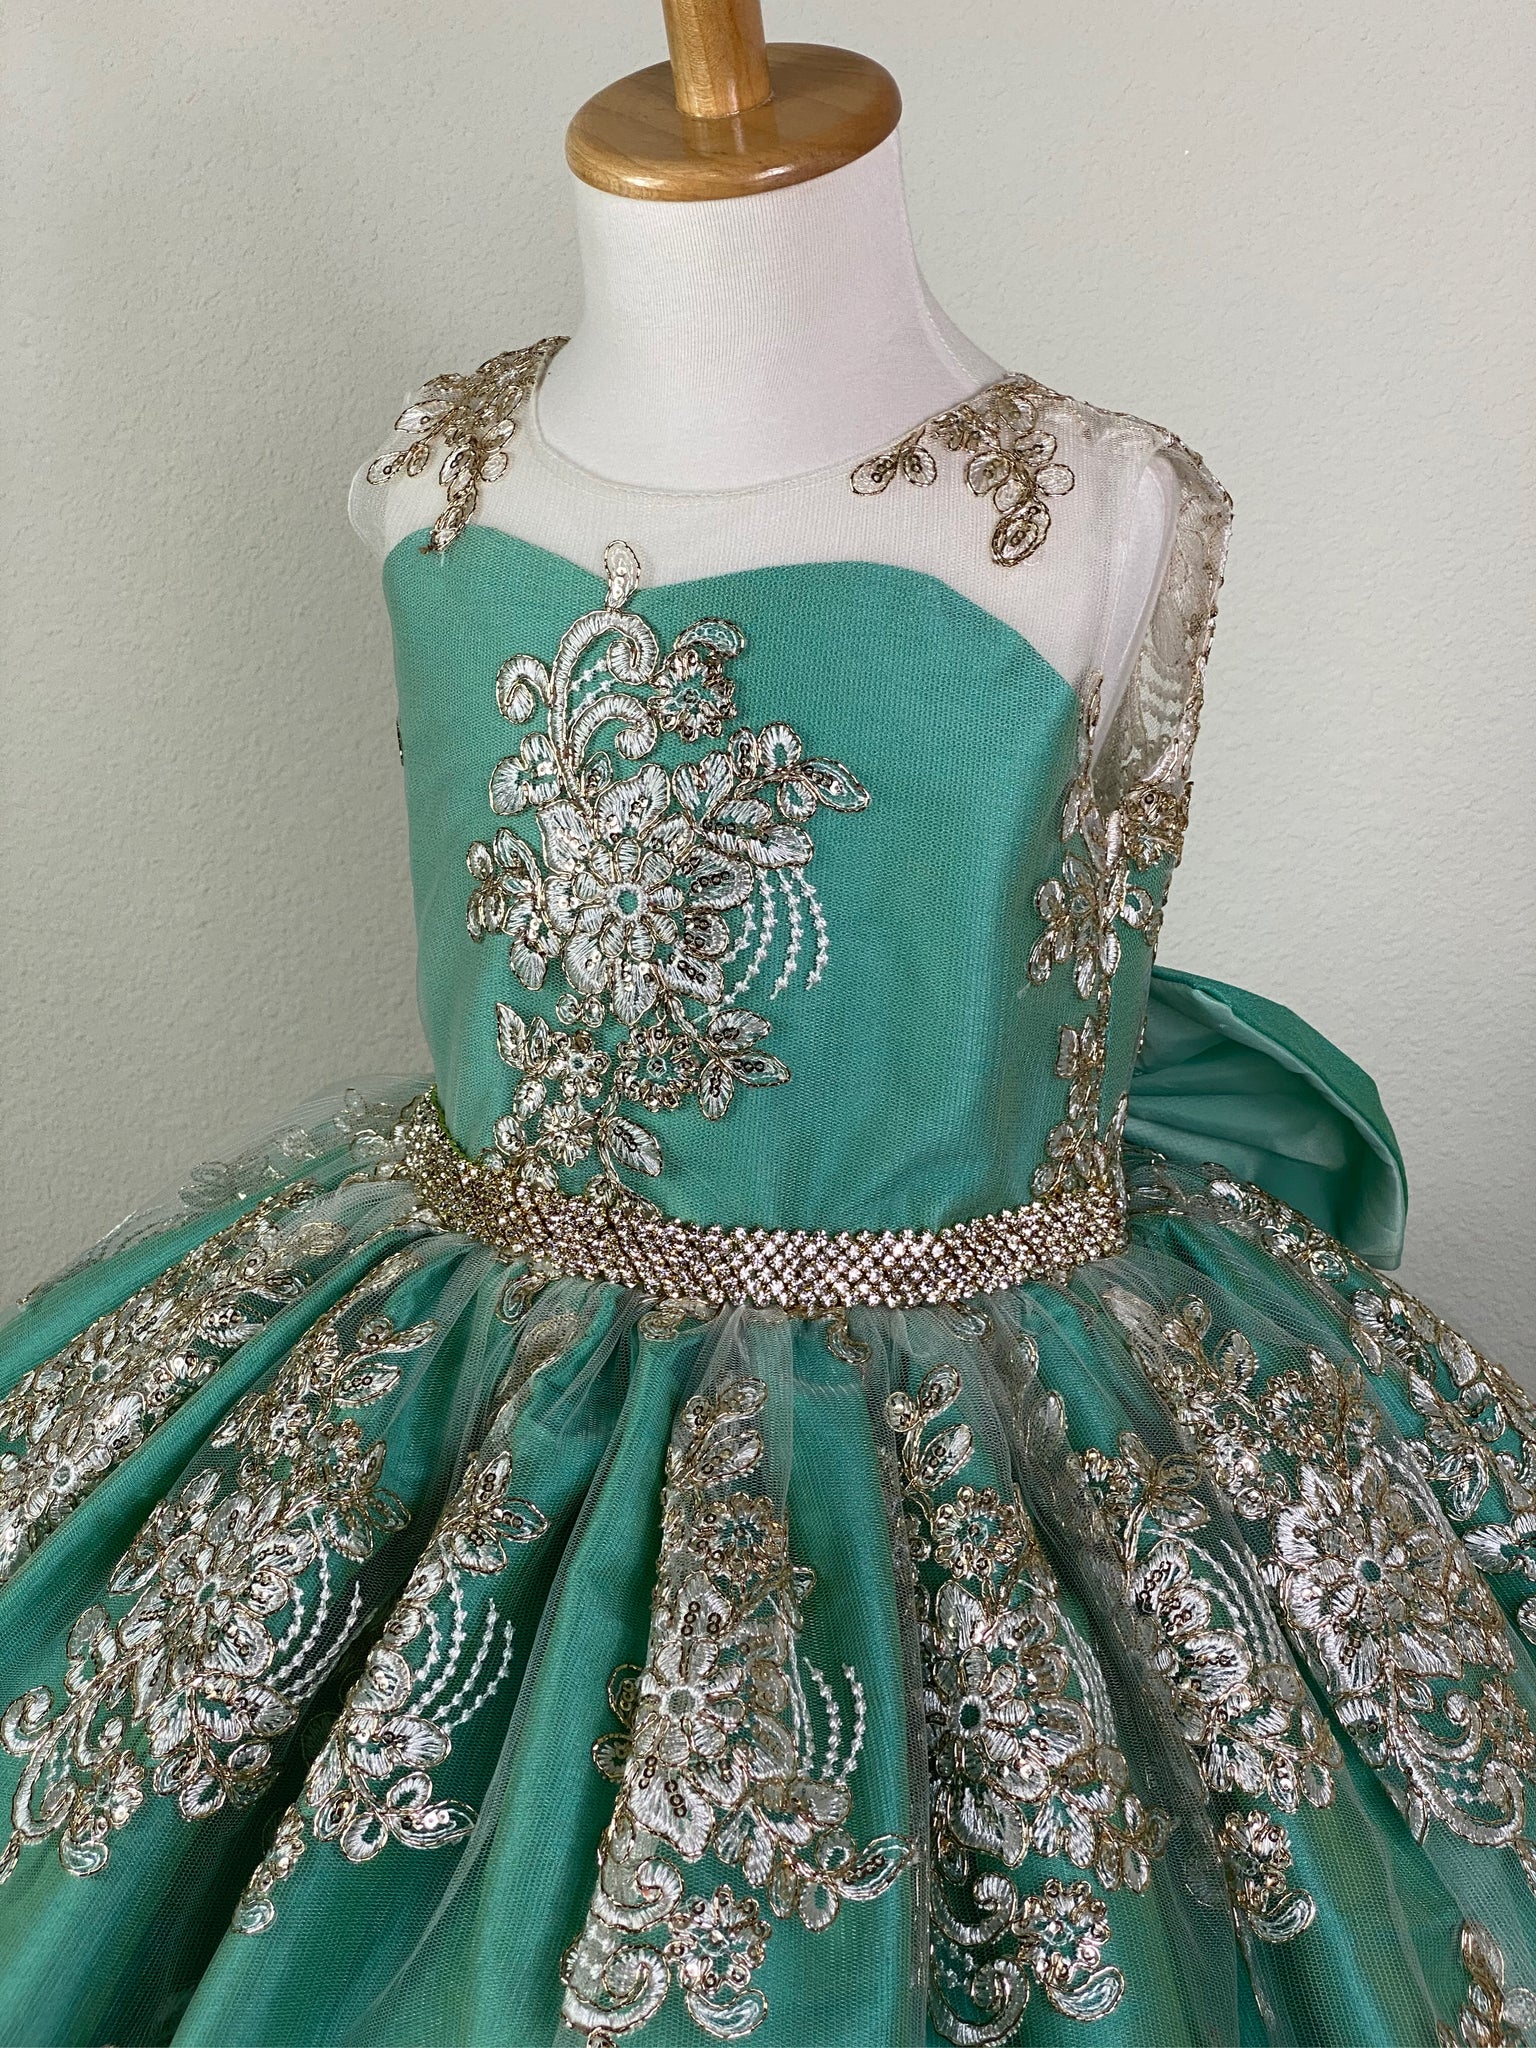 Menta Green, size 4 illusion bodice with embroidered white appliques on tulle Embellished rhinestone band along lower bodice Menta blue satin skirting with embroidered white appliques on tulle overlay Open back with button closure Large menta blue satin bow Dress pictured with a petticoat Petticoat not included  Choose from a tulle, cloth, or wire for best look